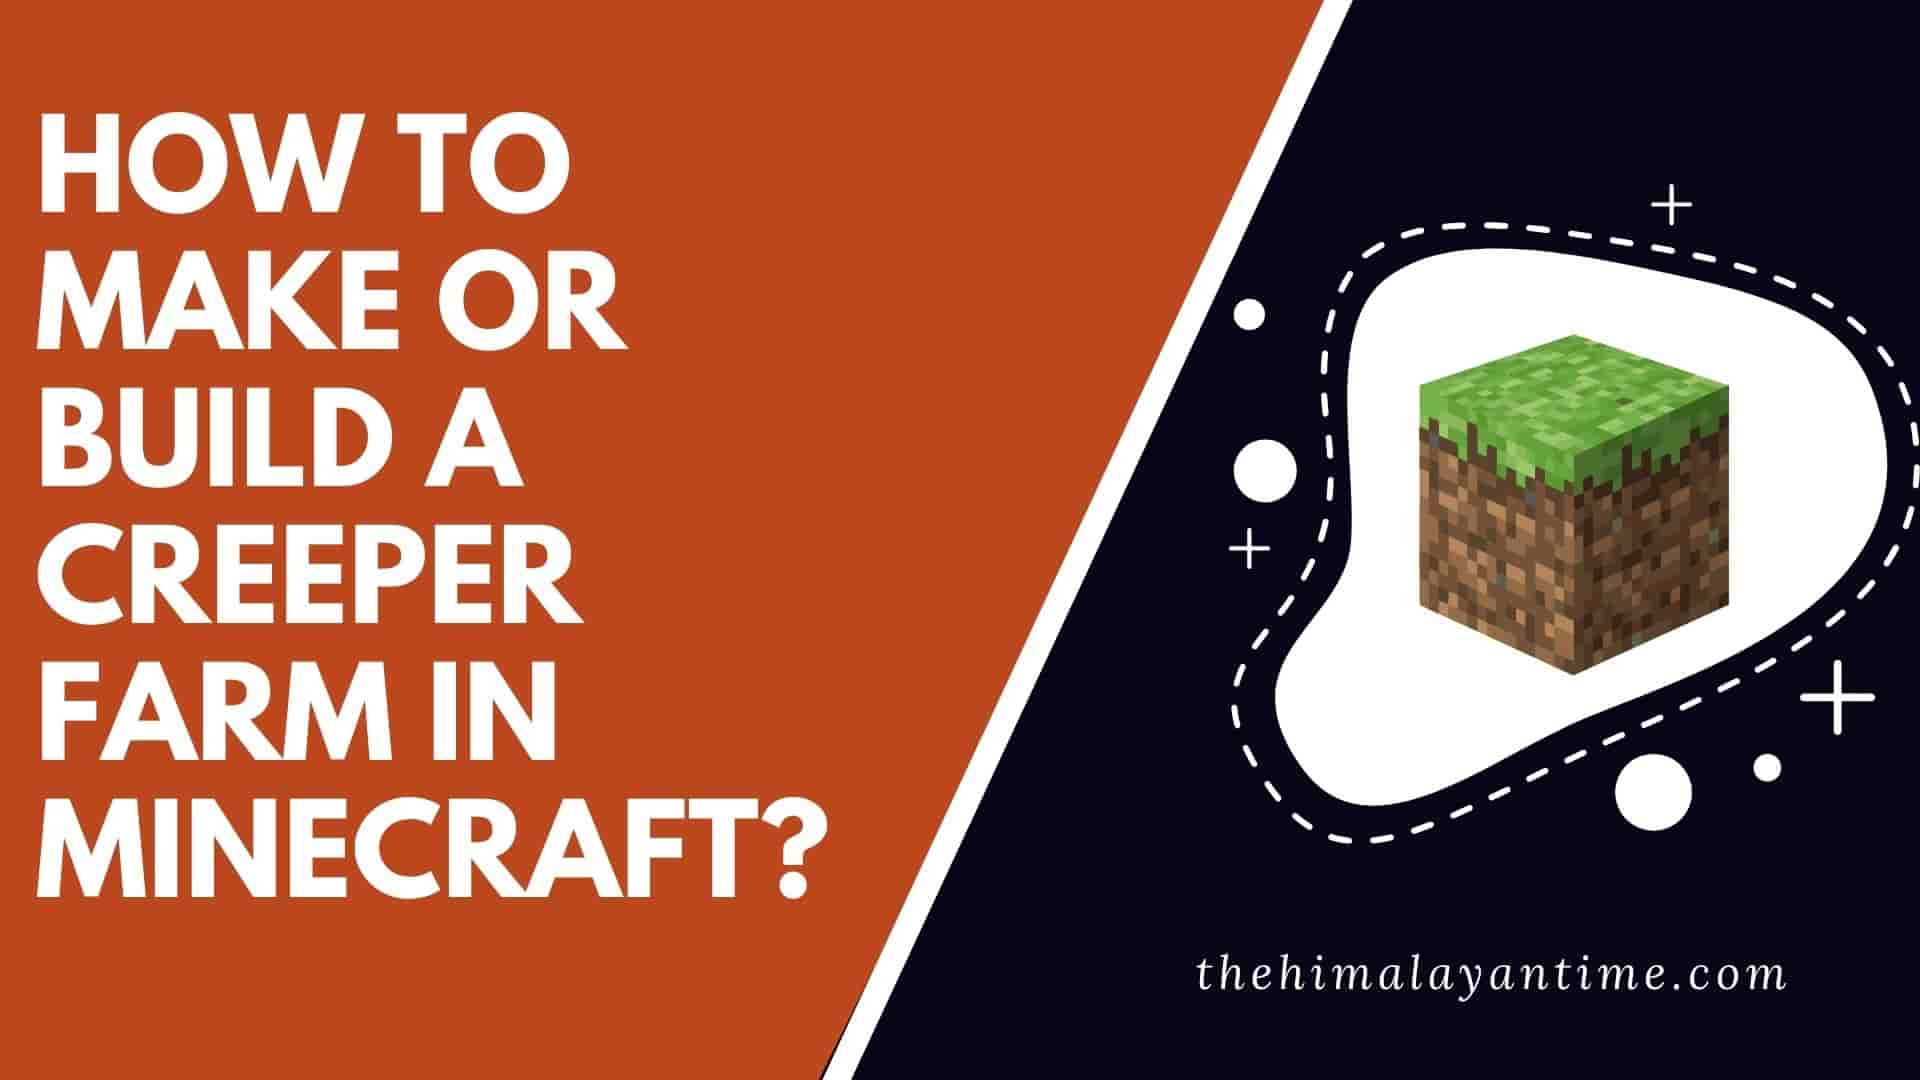 How to build a creeper farm in Minecraft